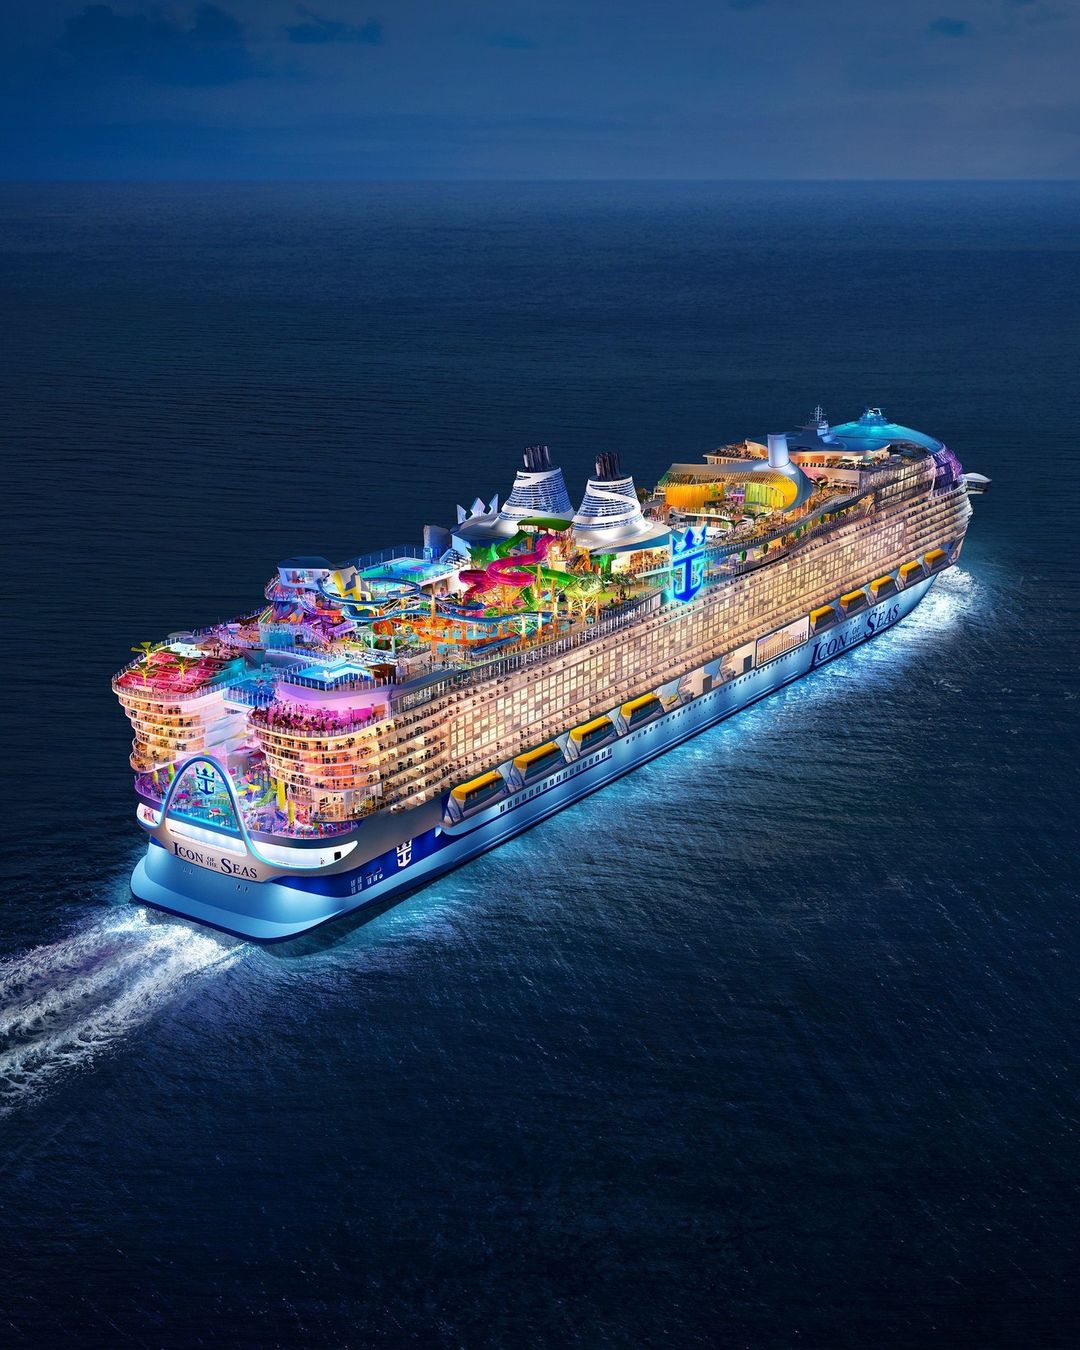 Spectacle Of The Seas World's Largest Cruise Ship To Set Sail